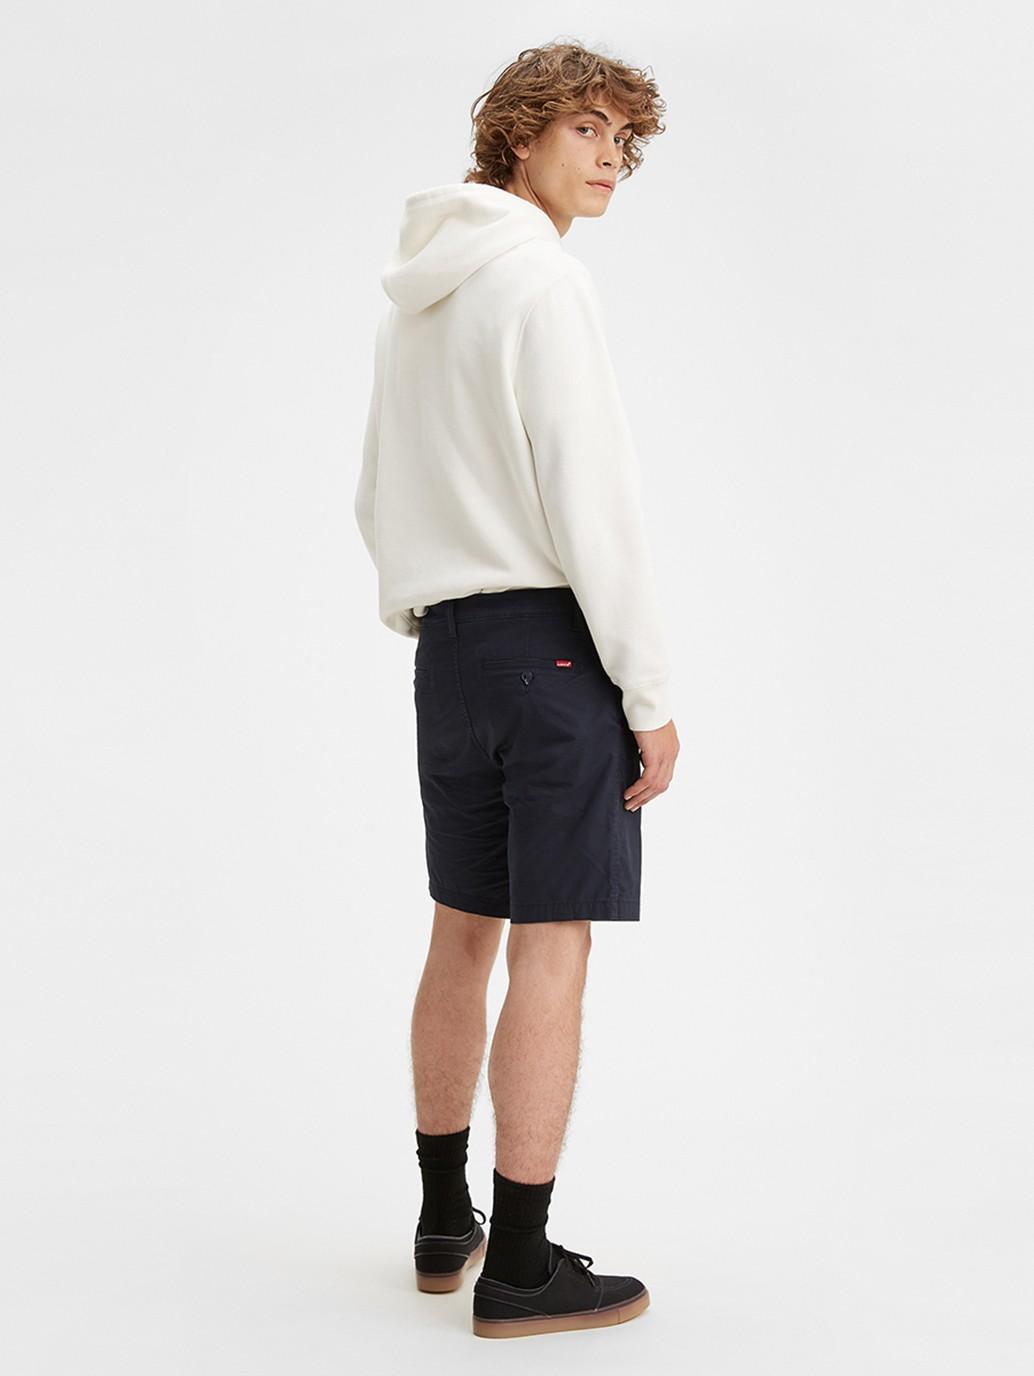 Buy Levi's® Men's XX Chino Standard Taper Shorts | Levi’s® Official ...